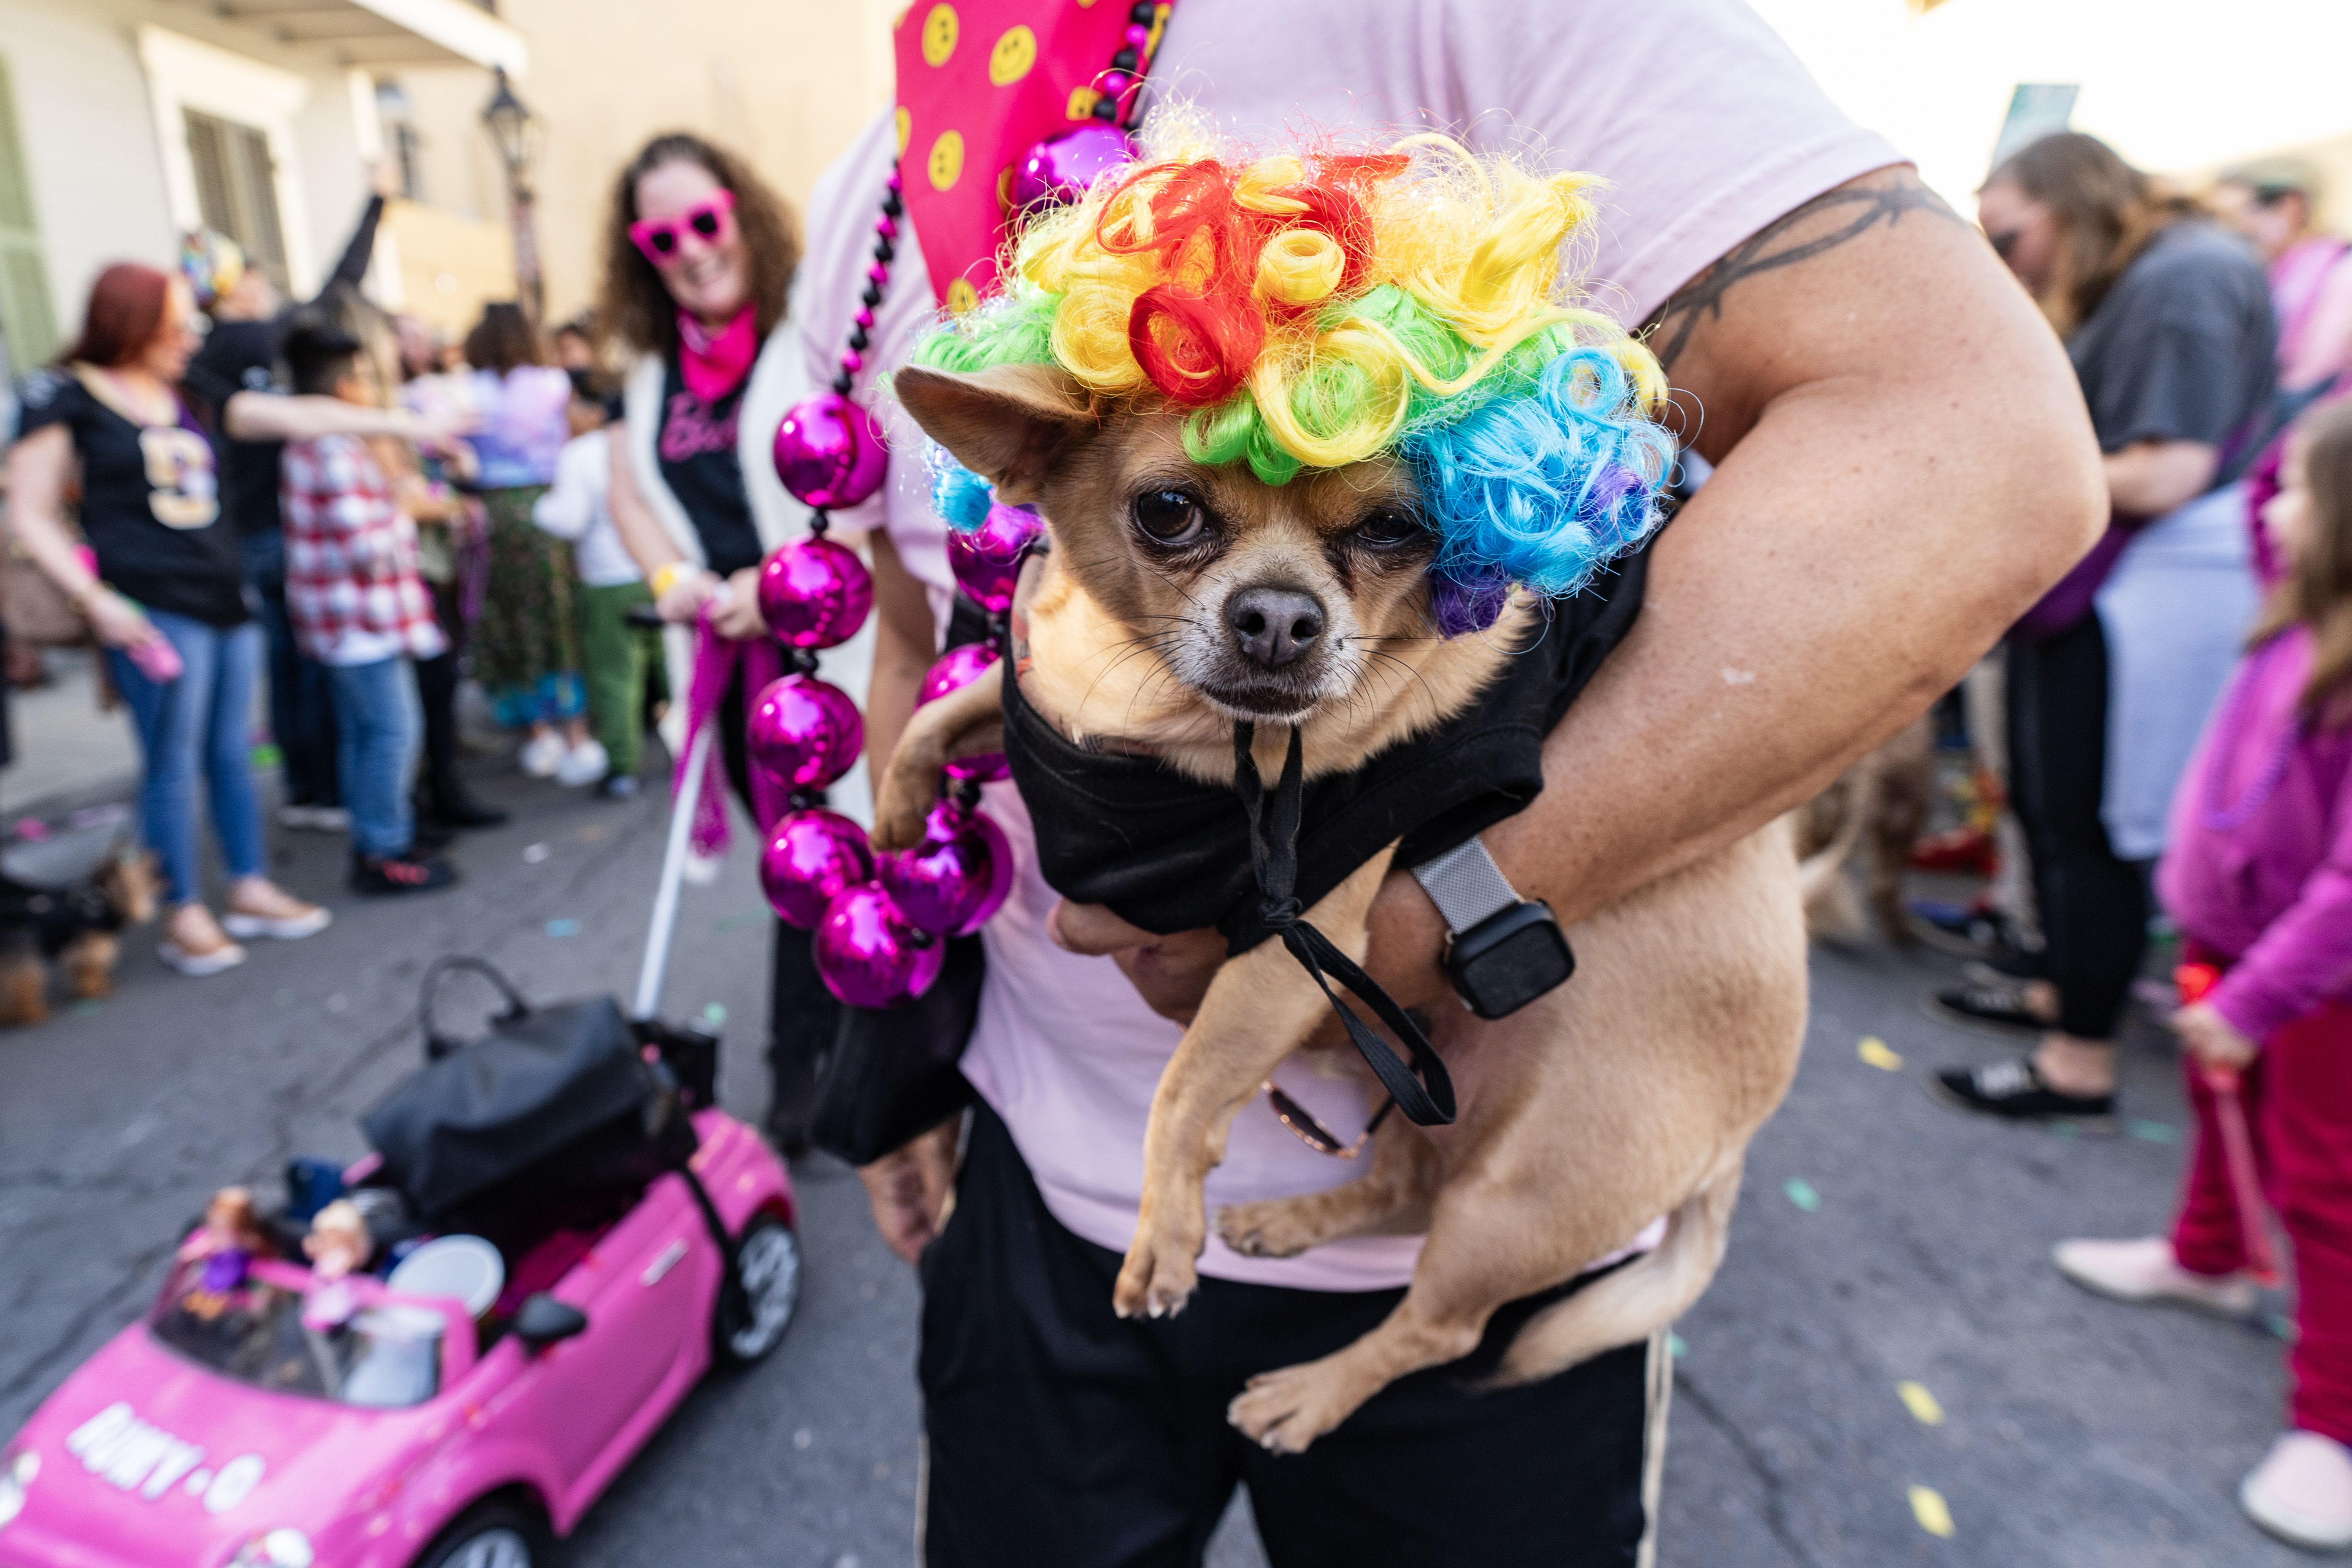 A Chihuahua wears a wig while its owner holds it.